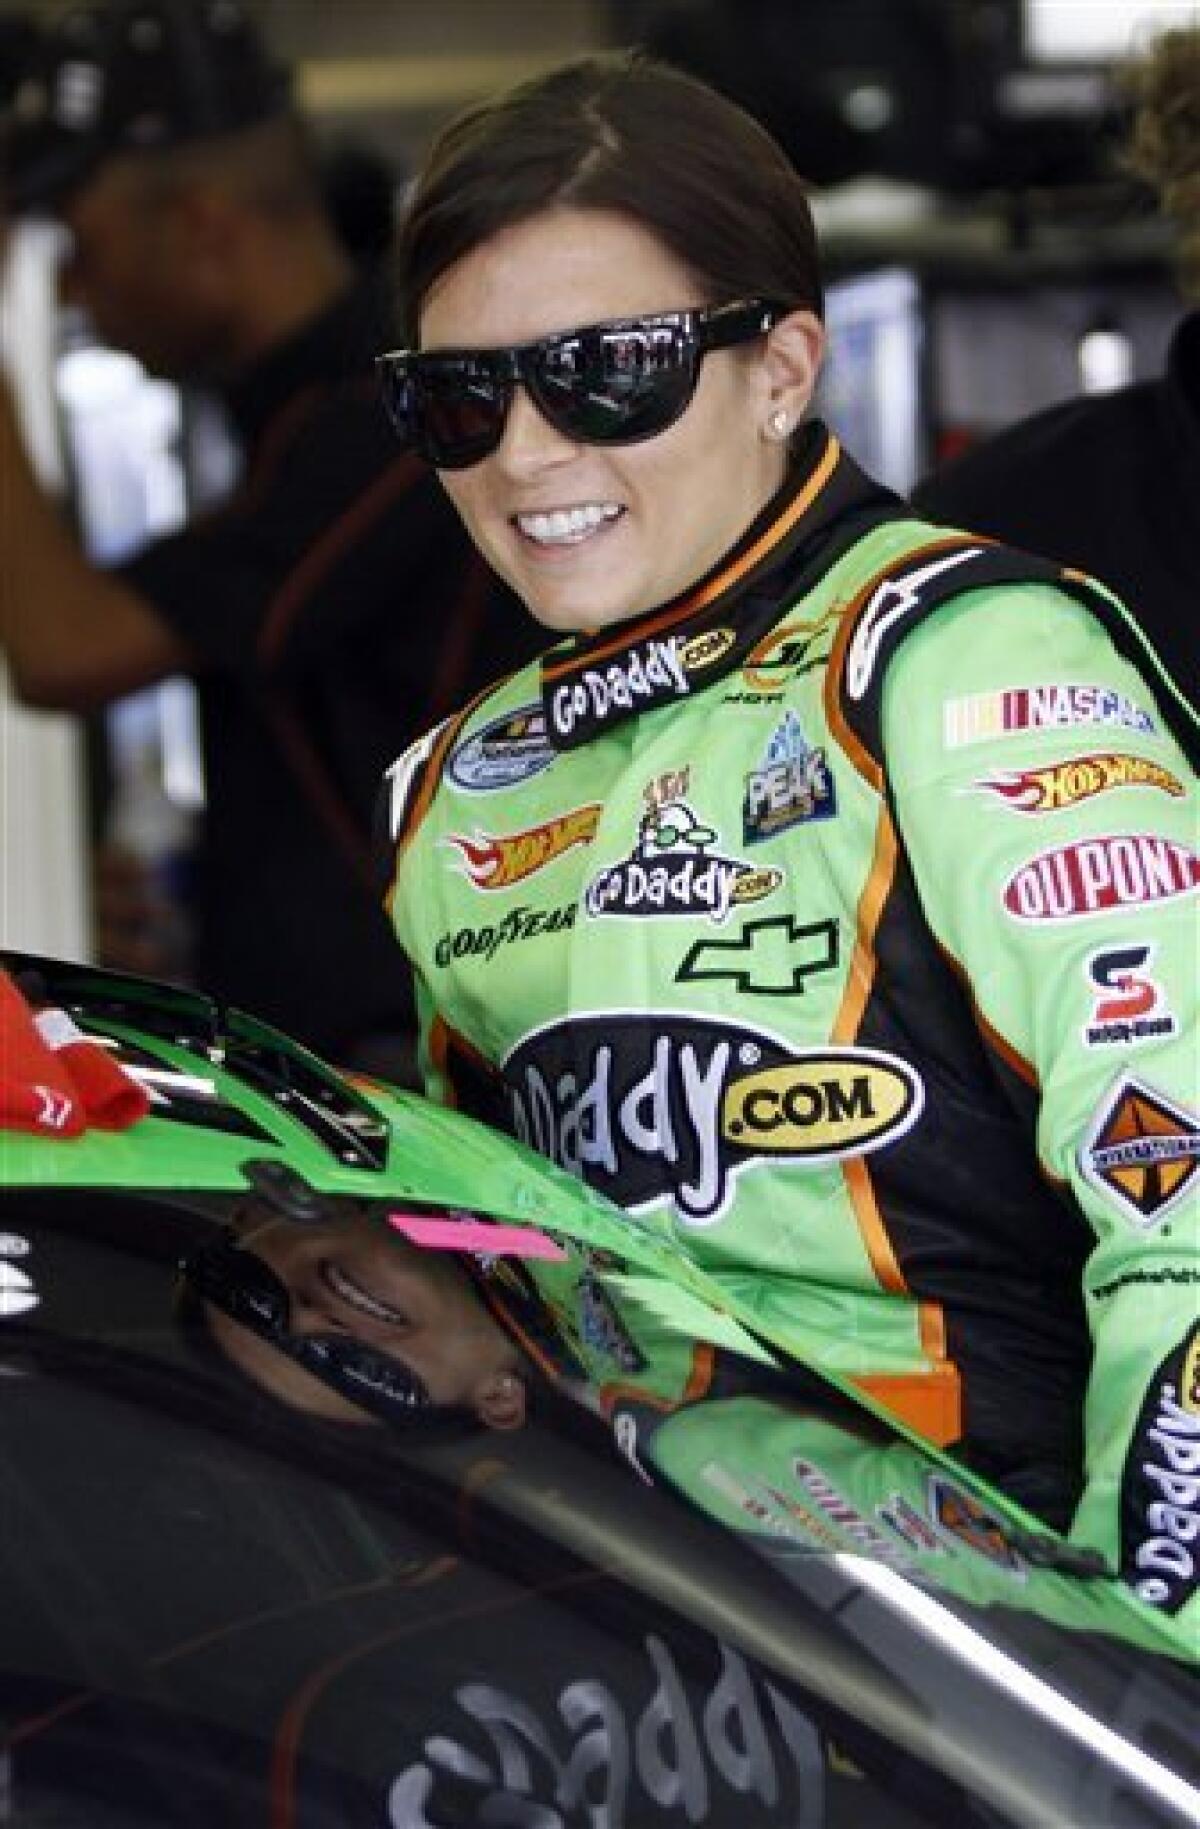 Von Maur - Join us in the welcoming NASCAR driver Danica